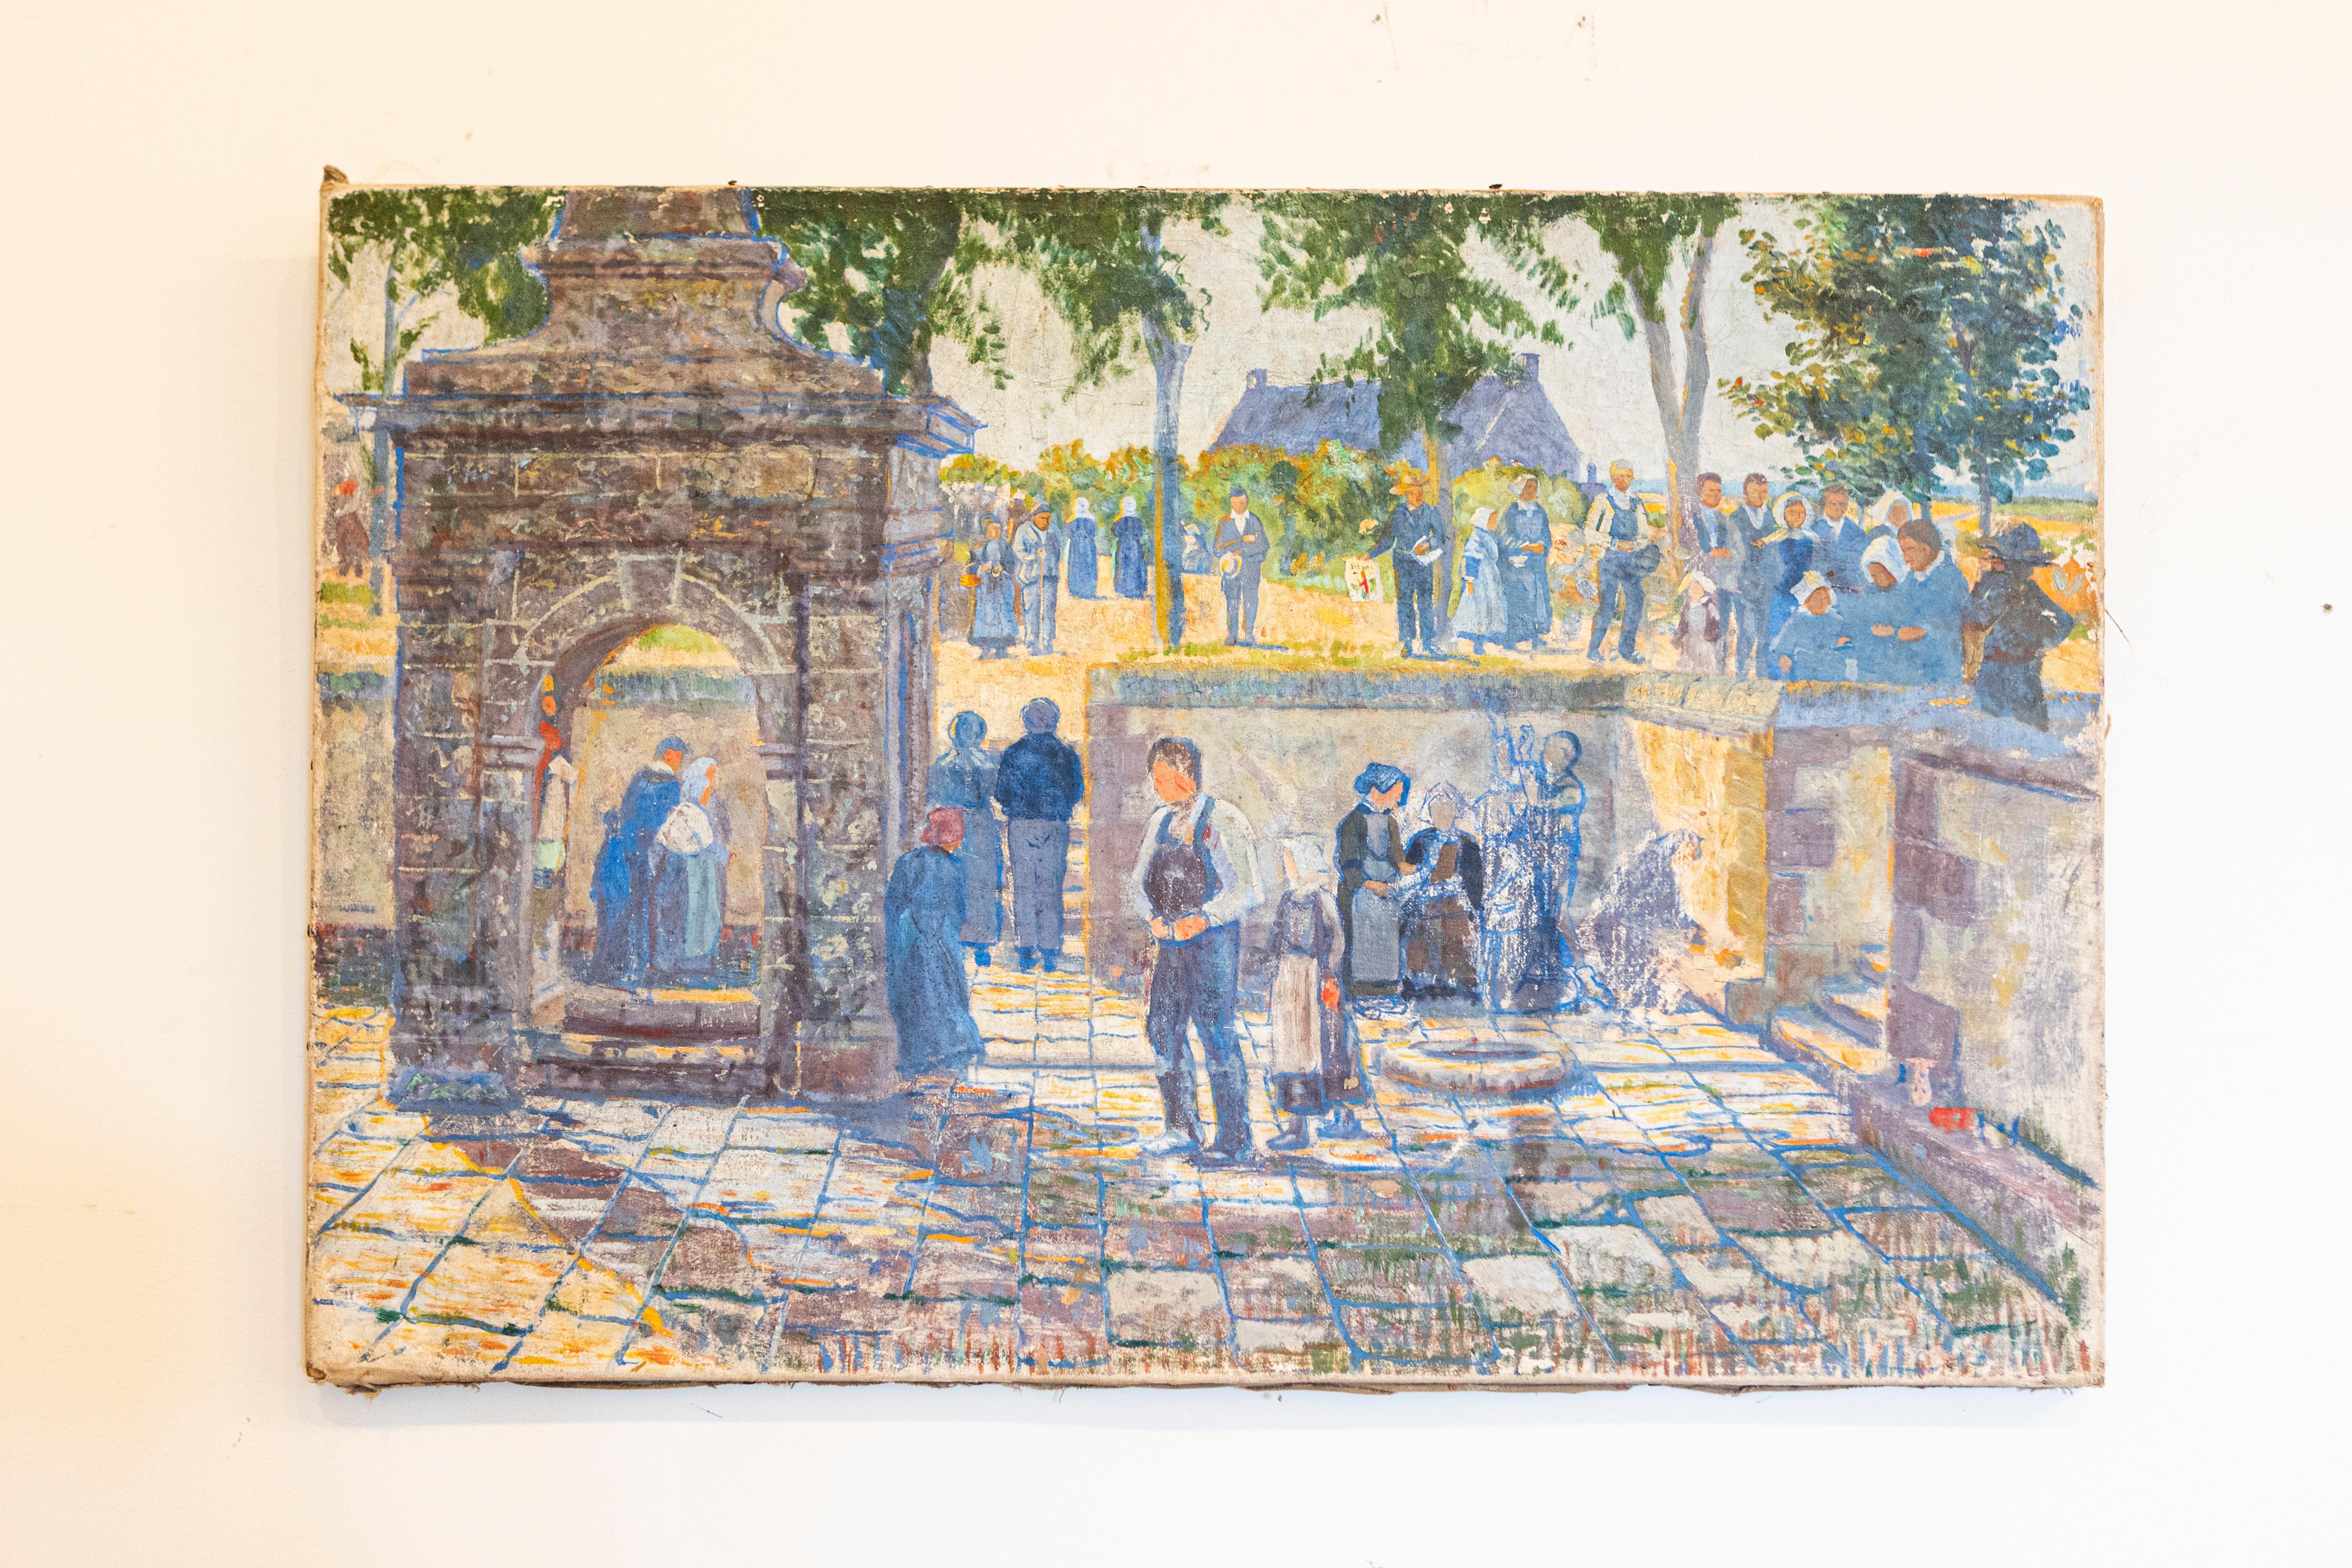 A French late 19th century oil on canvas painting from Aix-en-Provence depicting a social gathering in shades of blue. Born in Southern France during the 1890s, this unframed French horizontal painting depicts a social gathering spread out on two